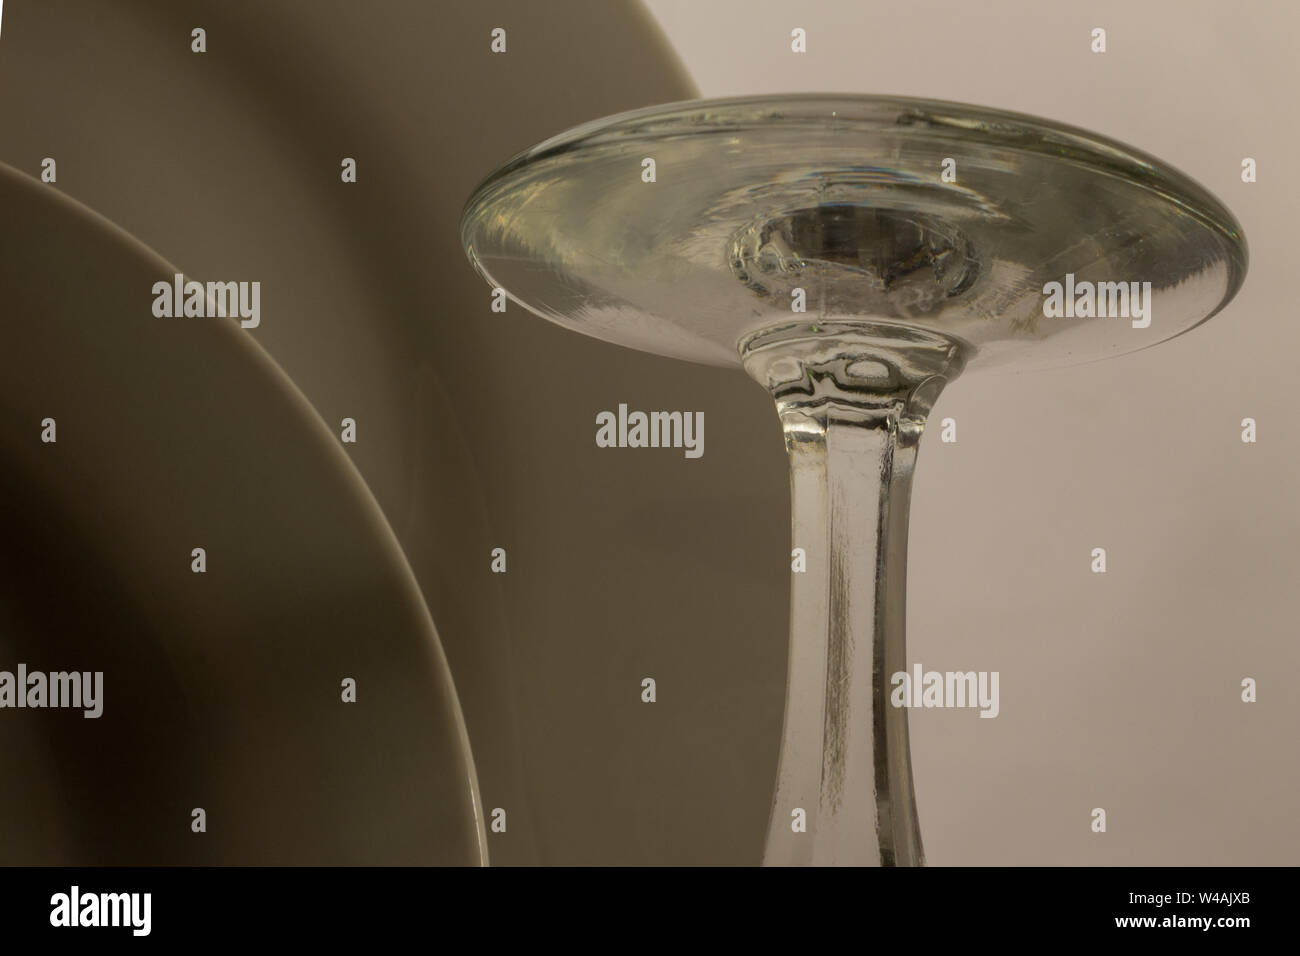 close-up details of the base of an inverted wine glass drying on a drainer next to two white plates Stock Photo